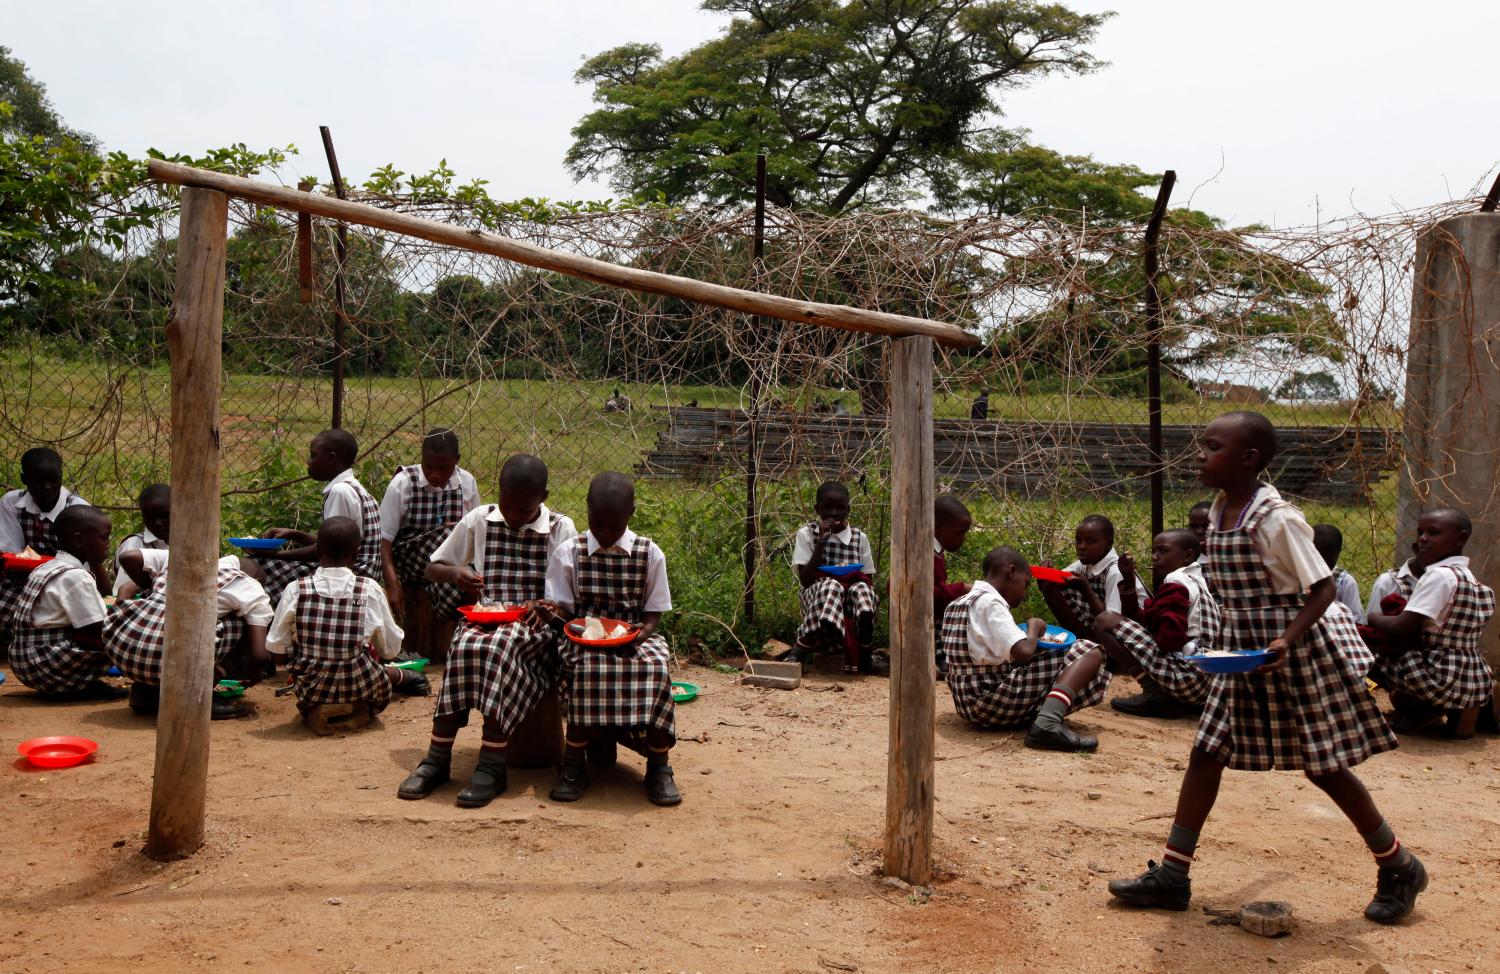 Students eats their lunch at Kyamusansala Primary School in Masaka in southern Uganda March 24, 2009. MALTA OUT. NO COMMERCIAL OR EDITORIAL SALES IN MALTAREUTERS/Darrin Zammit Lupi (UGANDA) - PM1E5560XG401